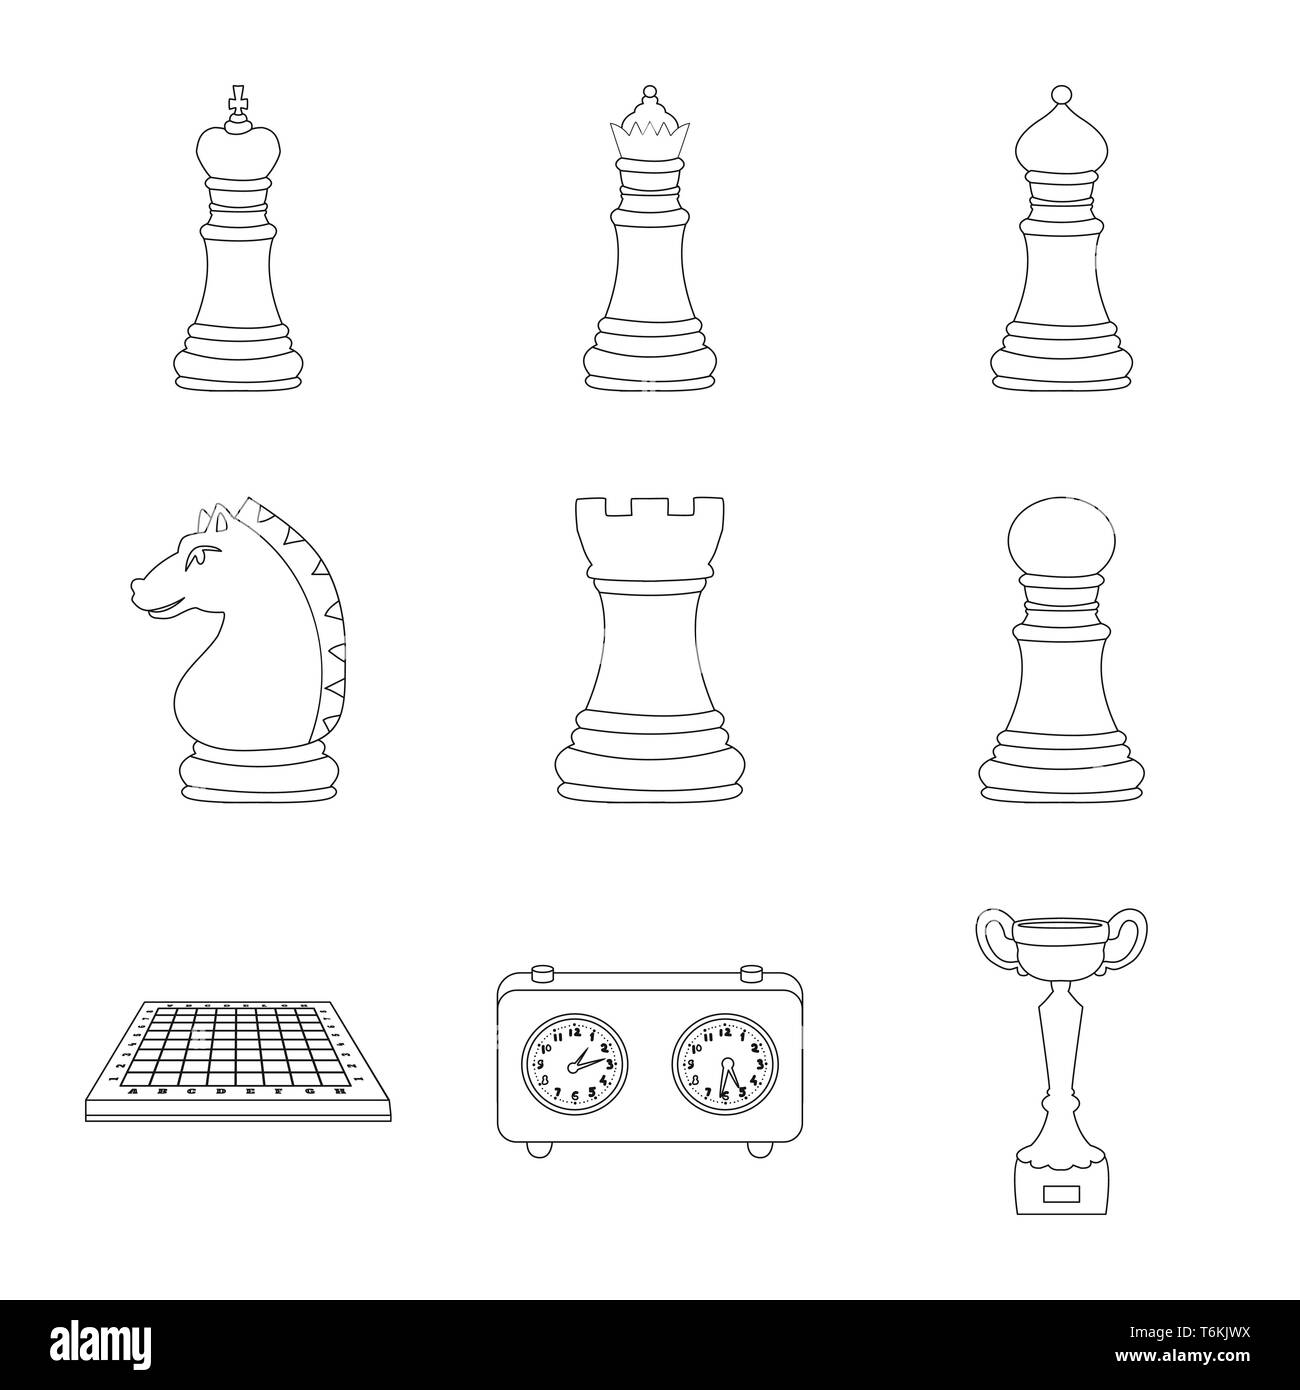 king,queen,bishop,knight,rook,pawn,chessboard,clock,cup,board,strategic,horse,black,timer,winner,leadership,check,head,network,counter,table,button,goblet,leader,business,figure,change,cage,piece,strategy,tactical,play,checkmate,thin,club,target,chess,game,set,vector,icon,illustration,isolated,collection,design,element,graphic,sign,outline,line Vector Vectors , Stock Vector